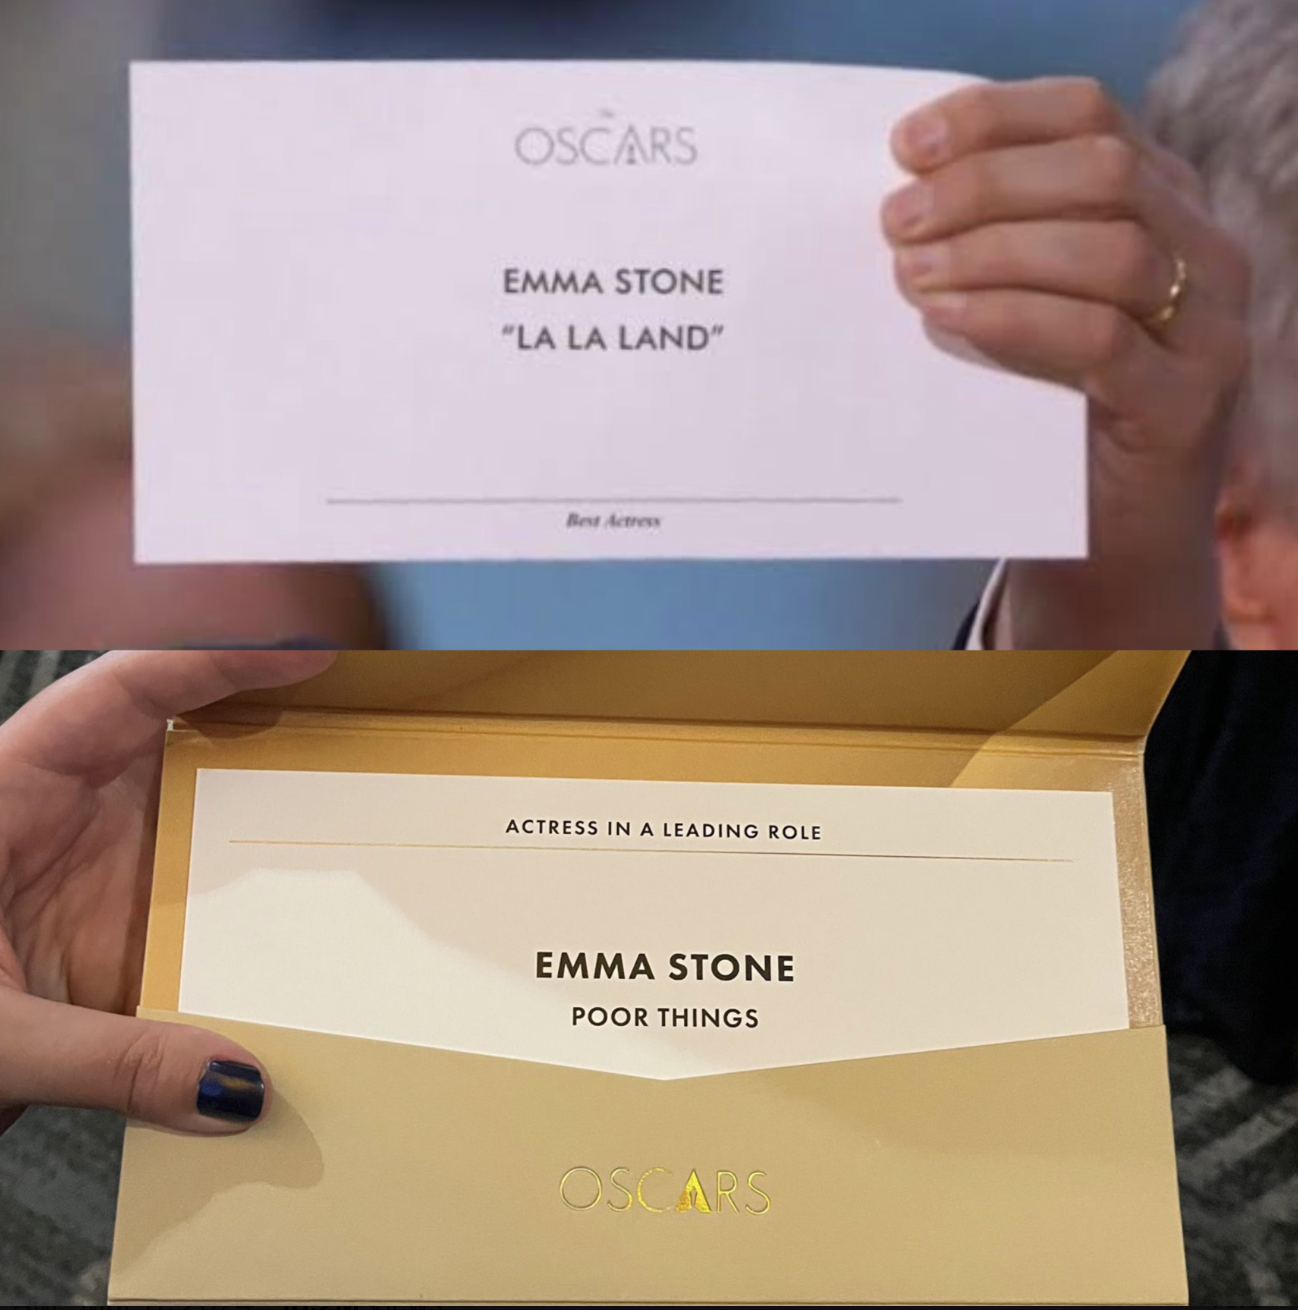 Top: &quot;Oscars Emma La Land&quot; Best Actress card; bottom: &quot;Actress in a Leading Role, Emma Stone, Poor Things&quot; on an Oscar envelope